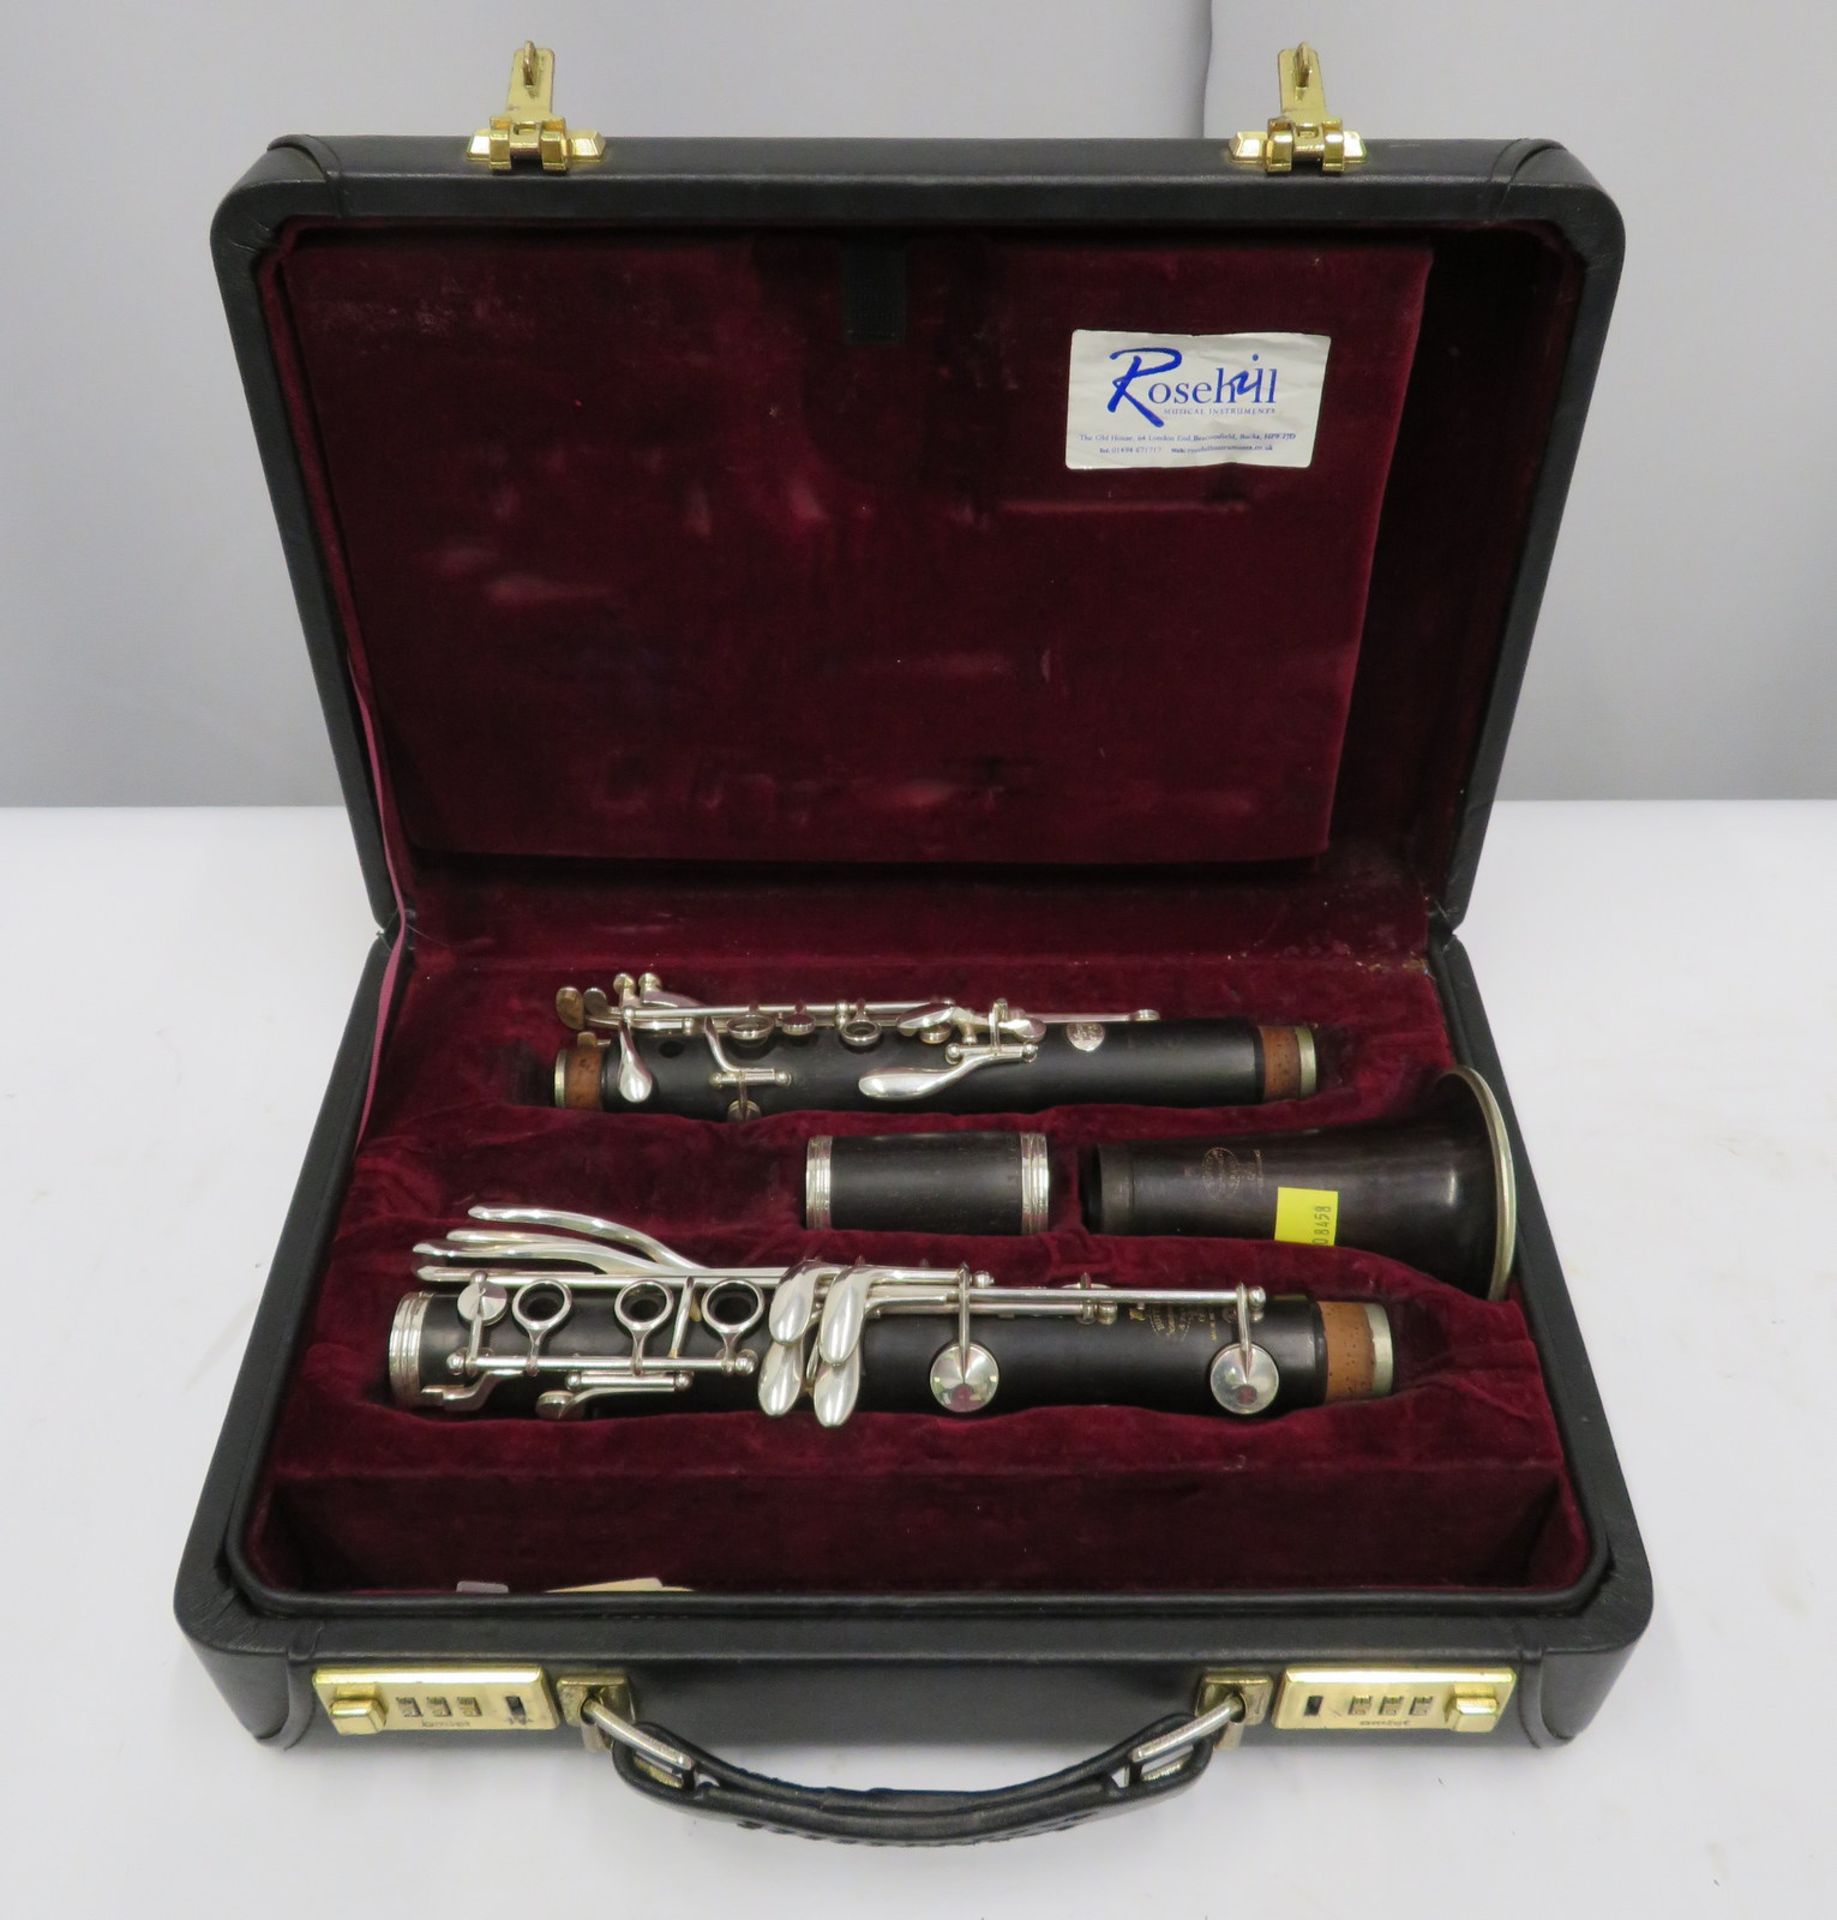 Buffet Crampon R13 Prestige clarinet with case. Serial number: 587000.